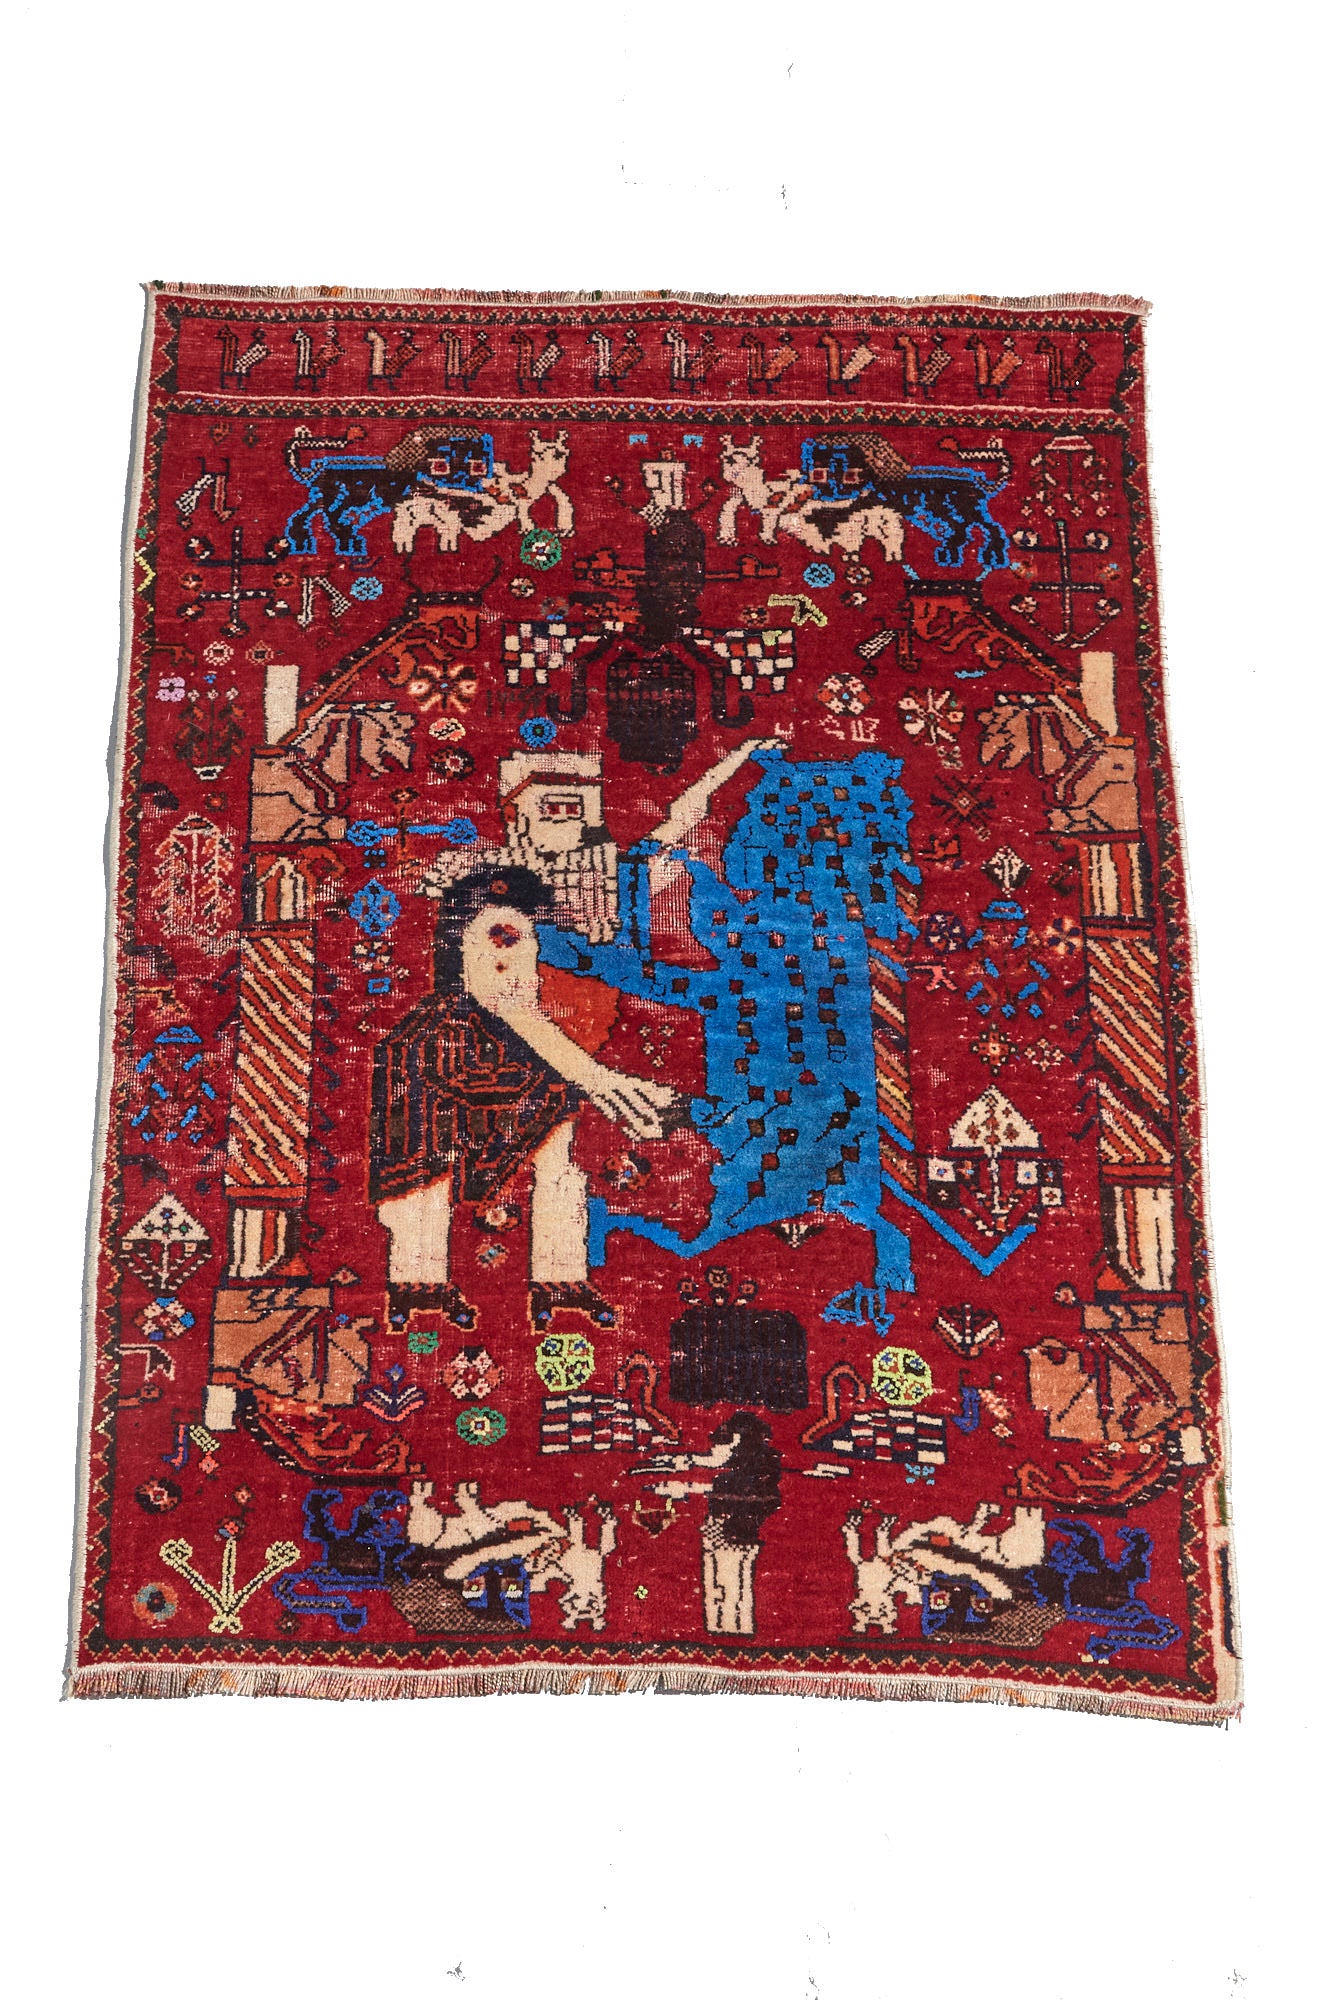 Unique and rare Persian pictorial hand woven rug with red base depicting a man wrestling a lion. Vibrant red and blue tones with cream, green and tan details. Perfect for study, living room, or wall hanging. Available from King Kennedy Rugs Los Angeles